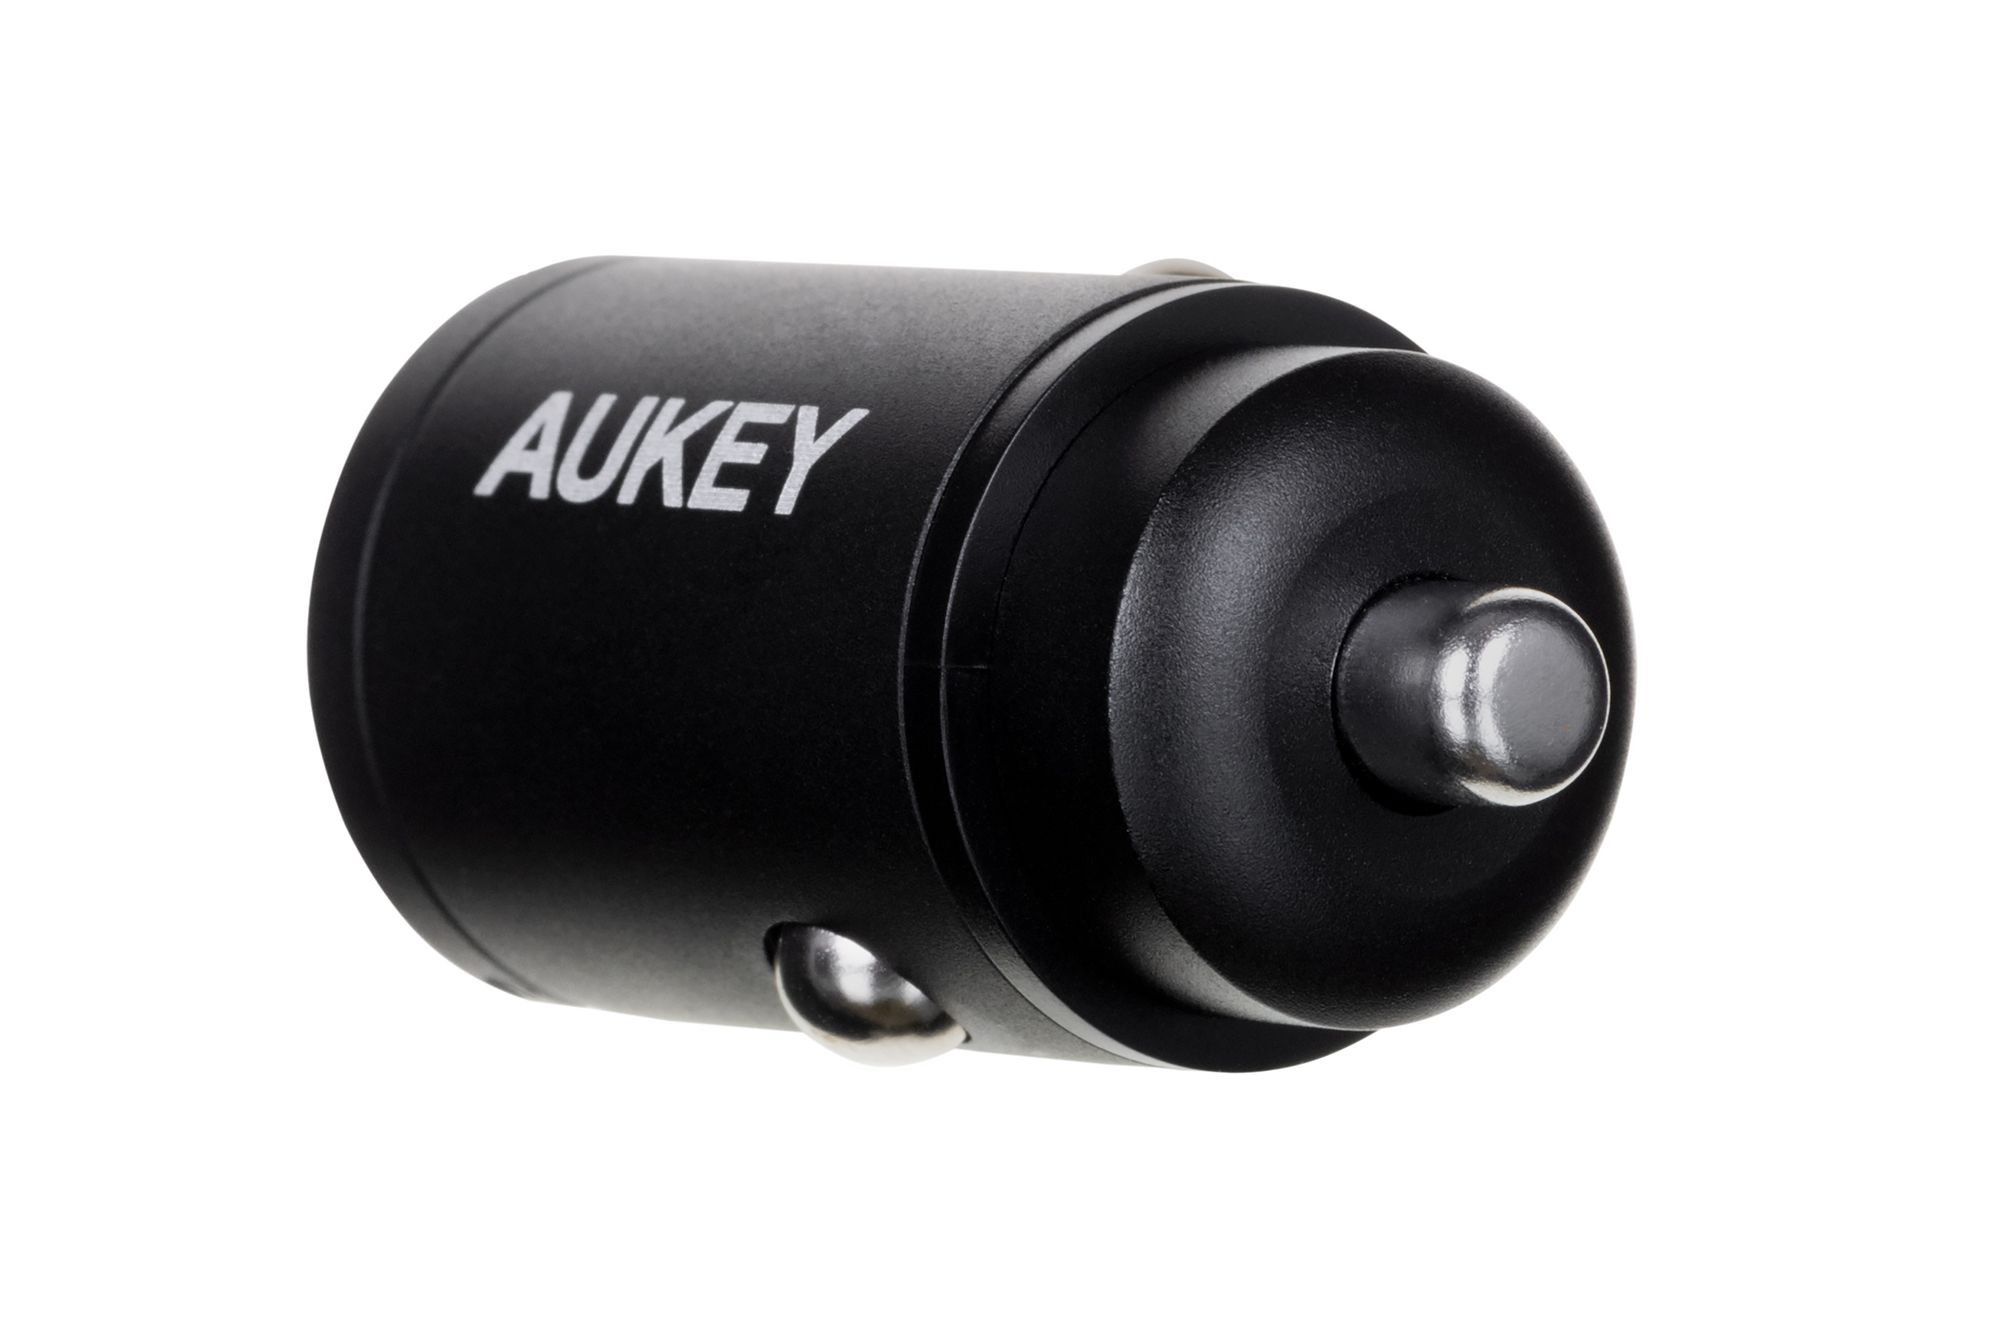 AUKEY CC-A4 mobile device charger Black Auto_4